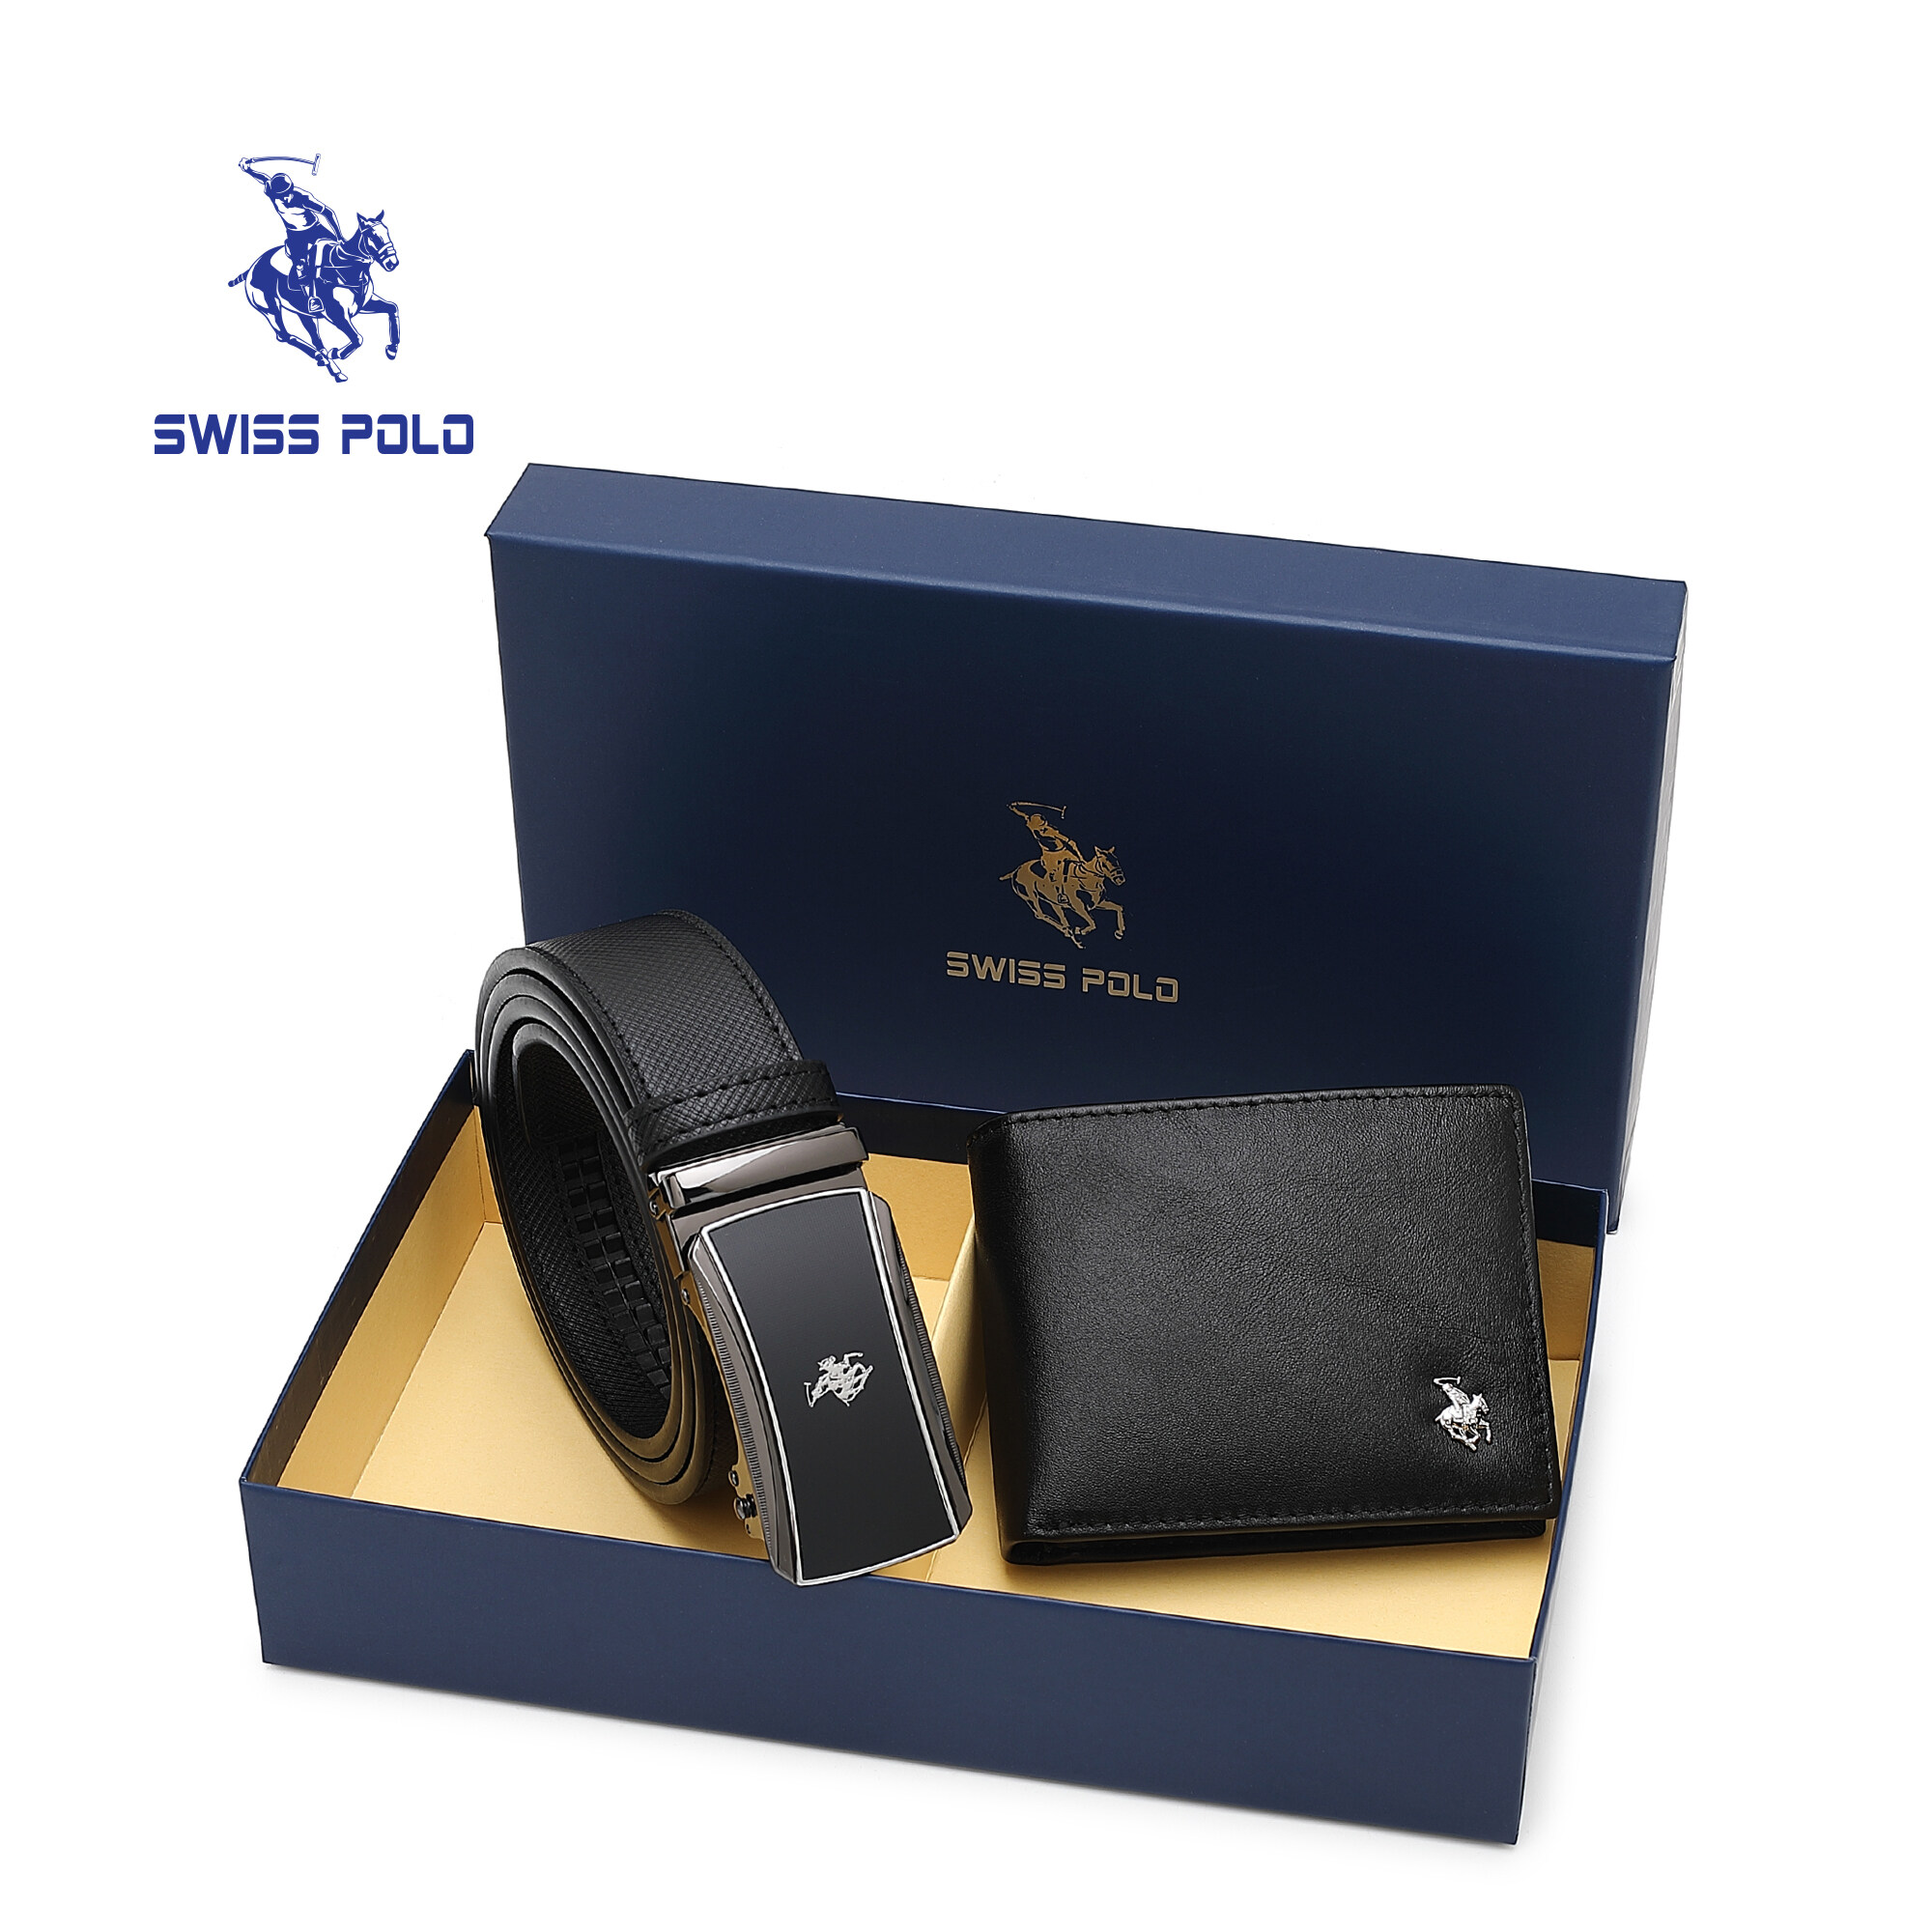 SWISS POLO Gift Set/ Box Wallet With Belt SGS 568-2 BLUE